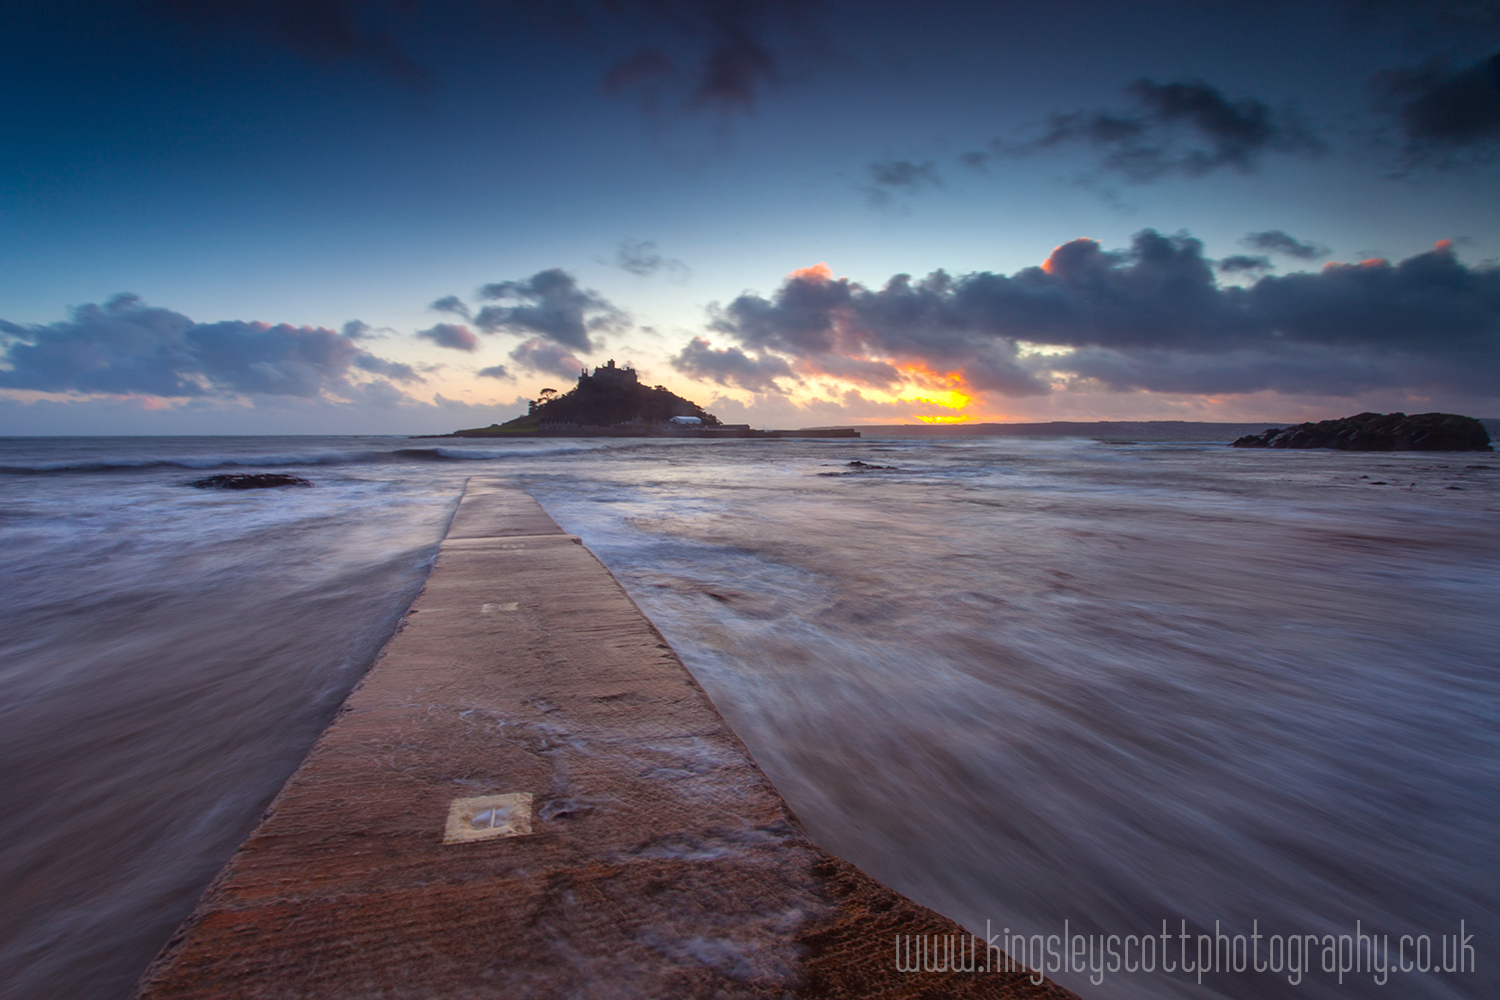 St Michael’s Mount: A Tidal Island with a Rich History